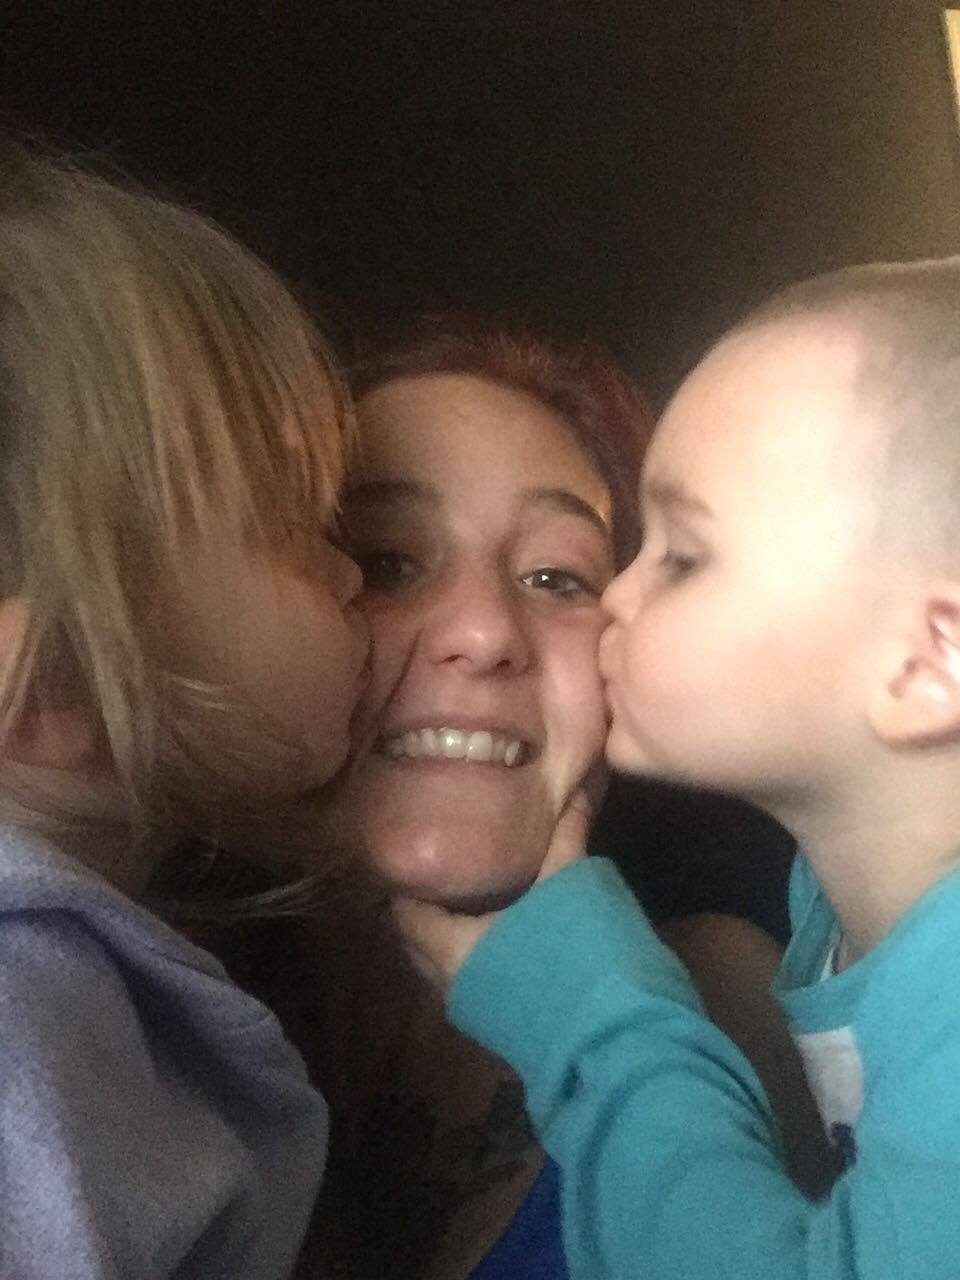 Daughter Madyson (left) and son Ryker (right) with their mother, Kelsey Osborne. (Credit: Kelsey Osborne)